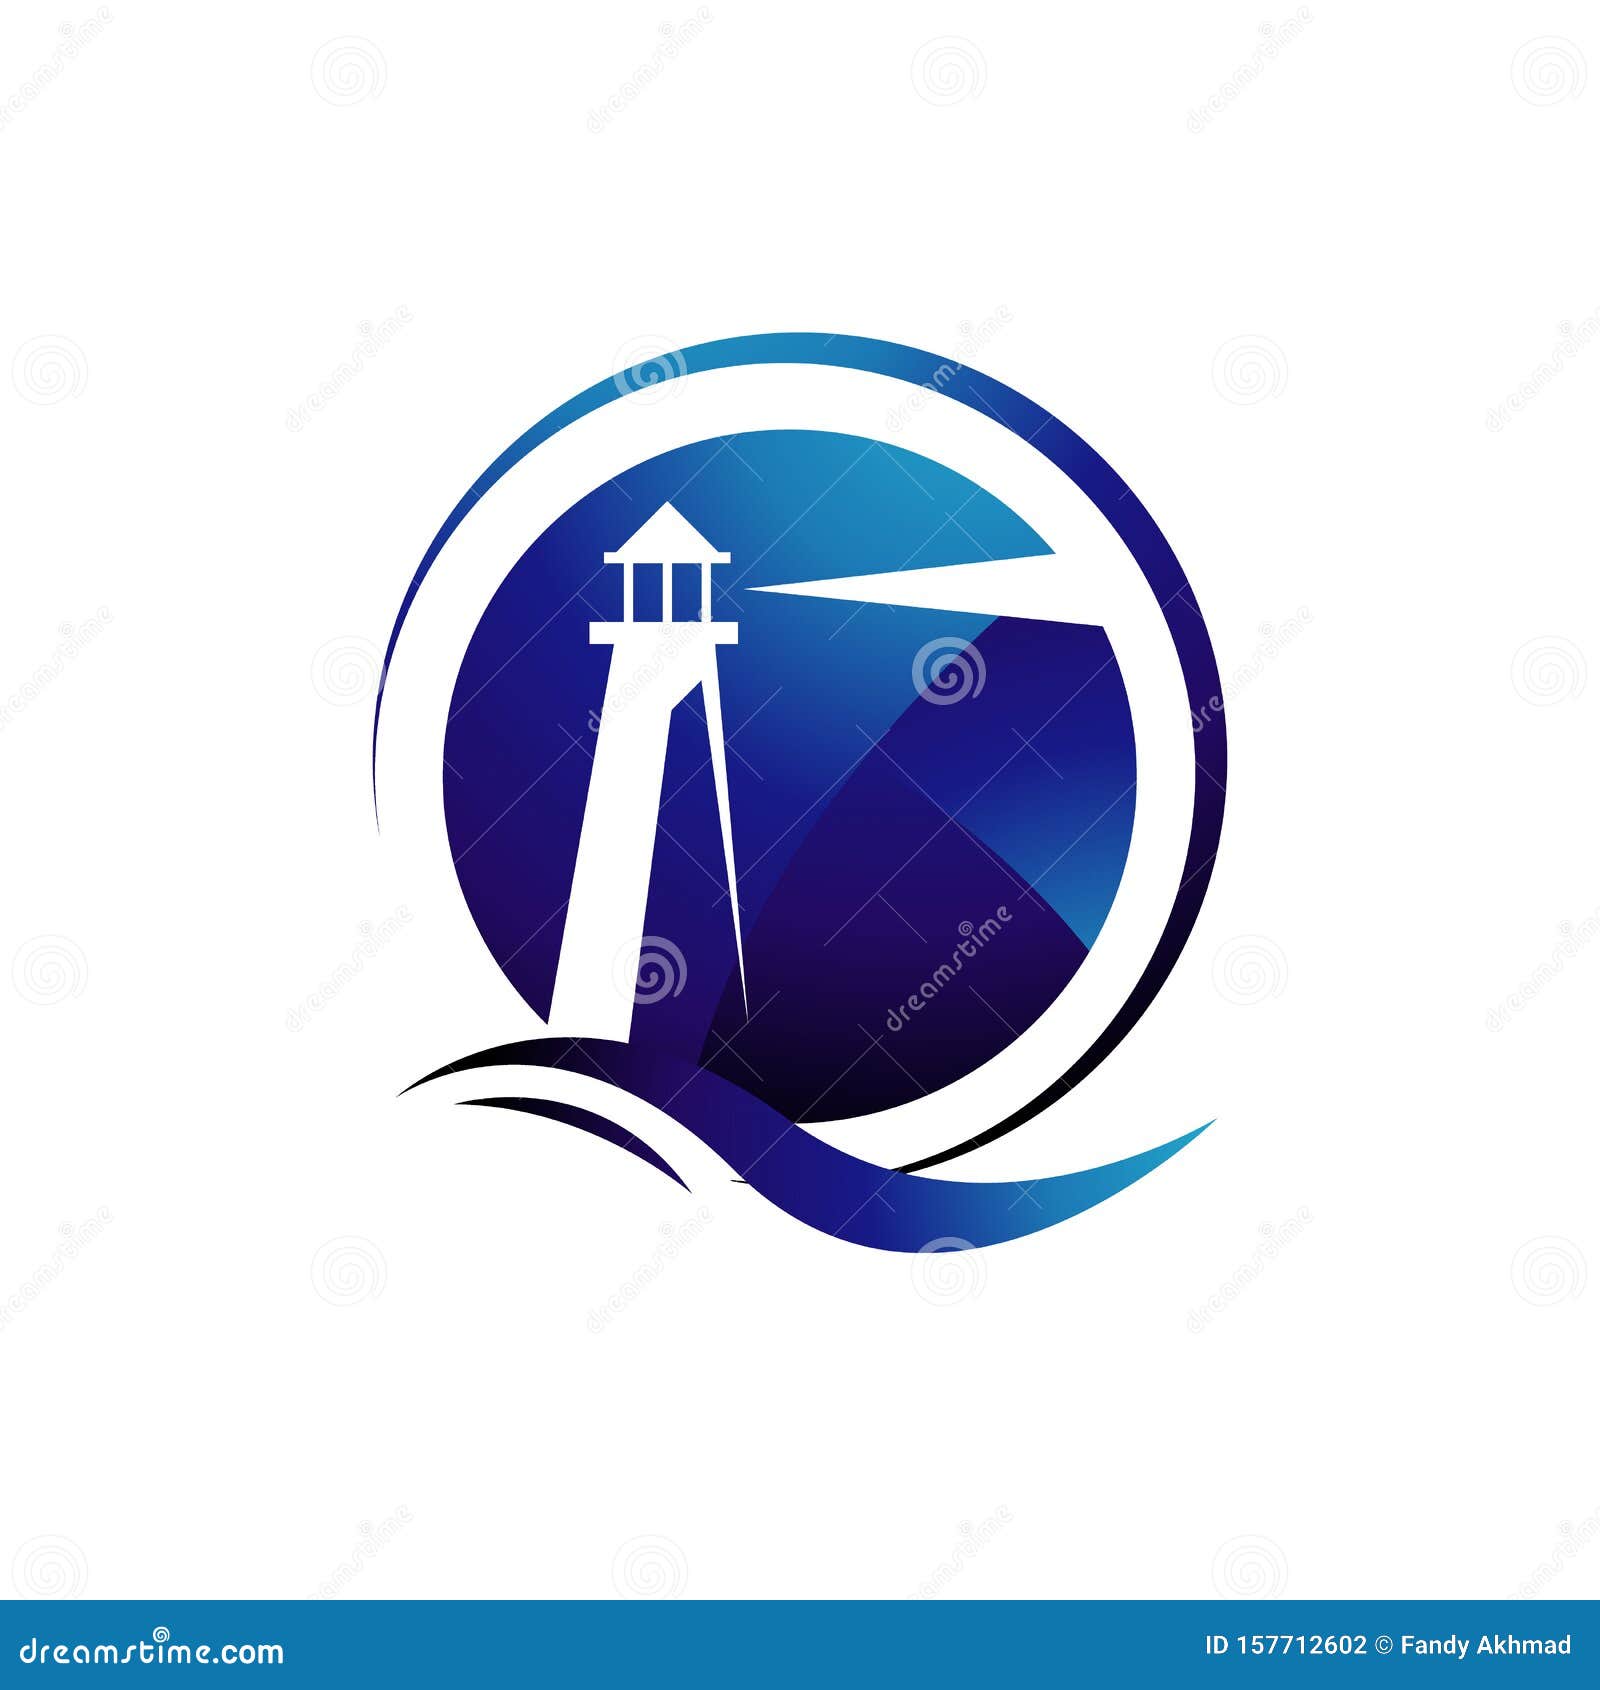 7,200+ Lighthouse Beacon Stock Illustrations, Royalty-Free Vector